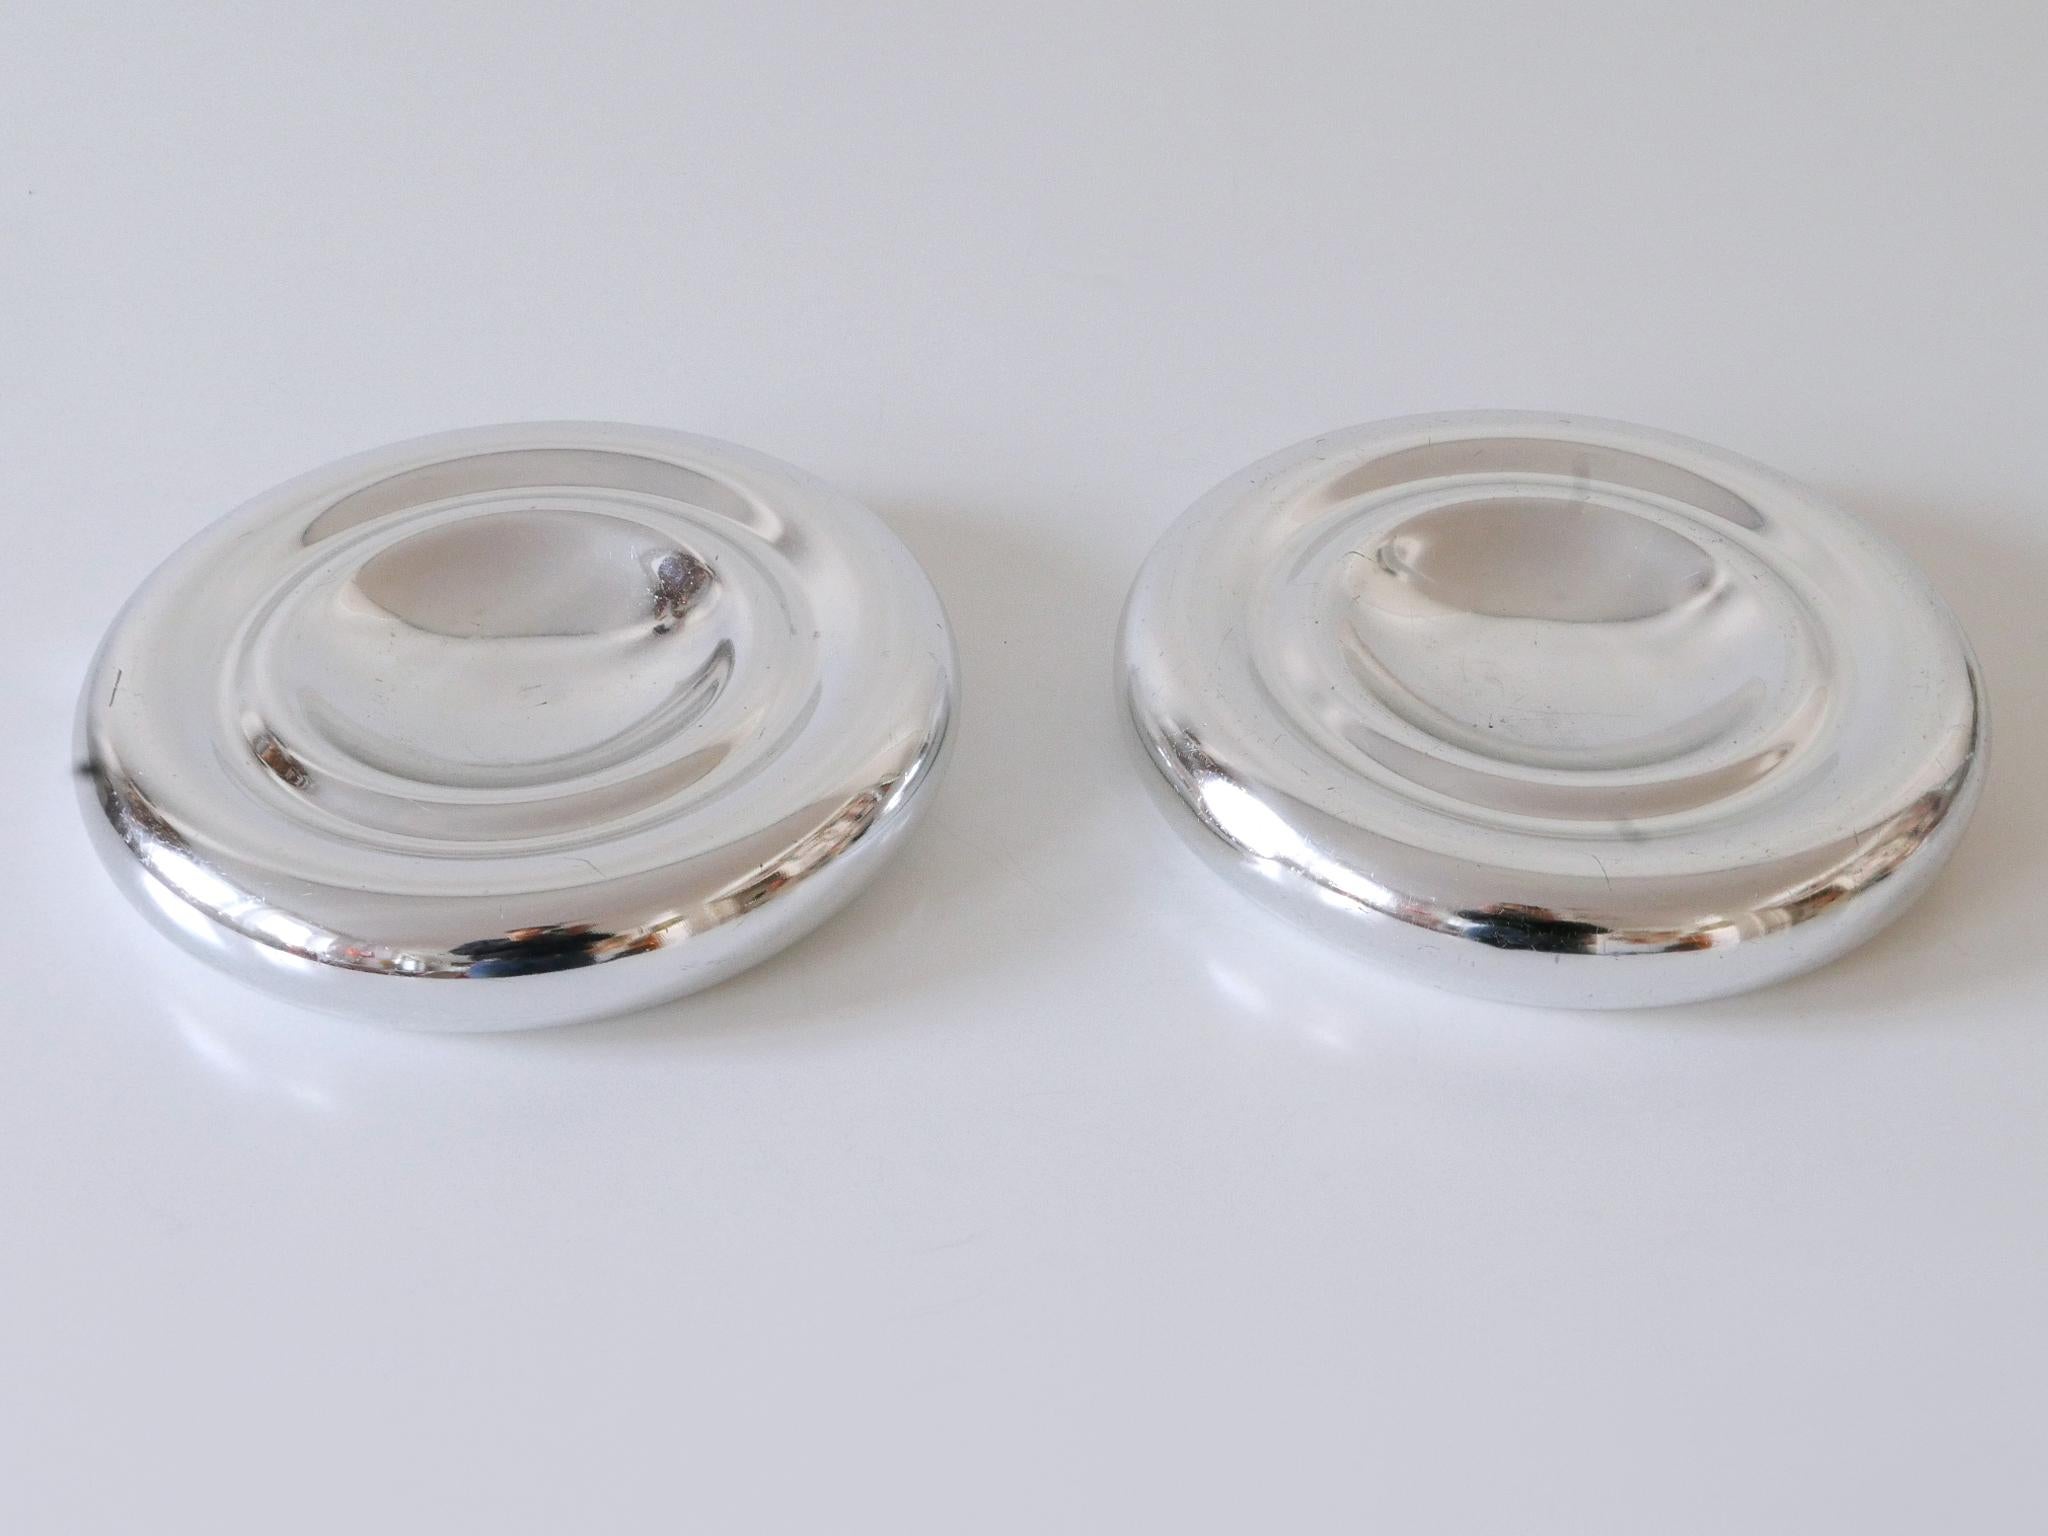 Set of Two Rare Mid-Century Modern Alu Bowls by Ingo Maurer for Design M 1970s For Sale 1